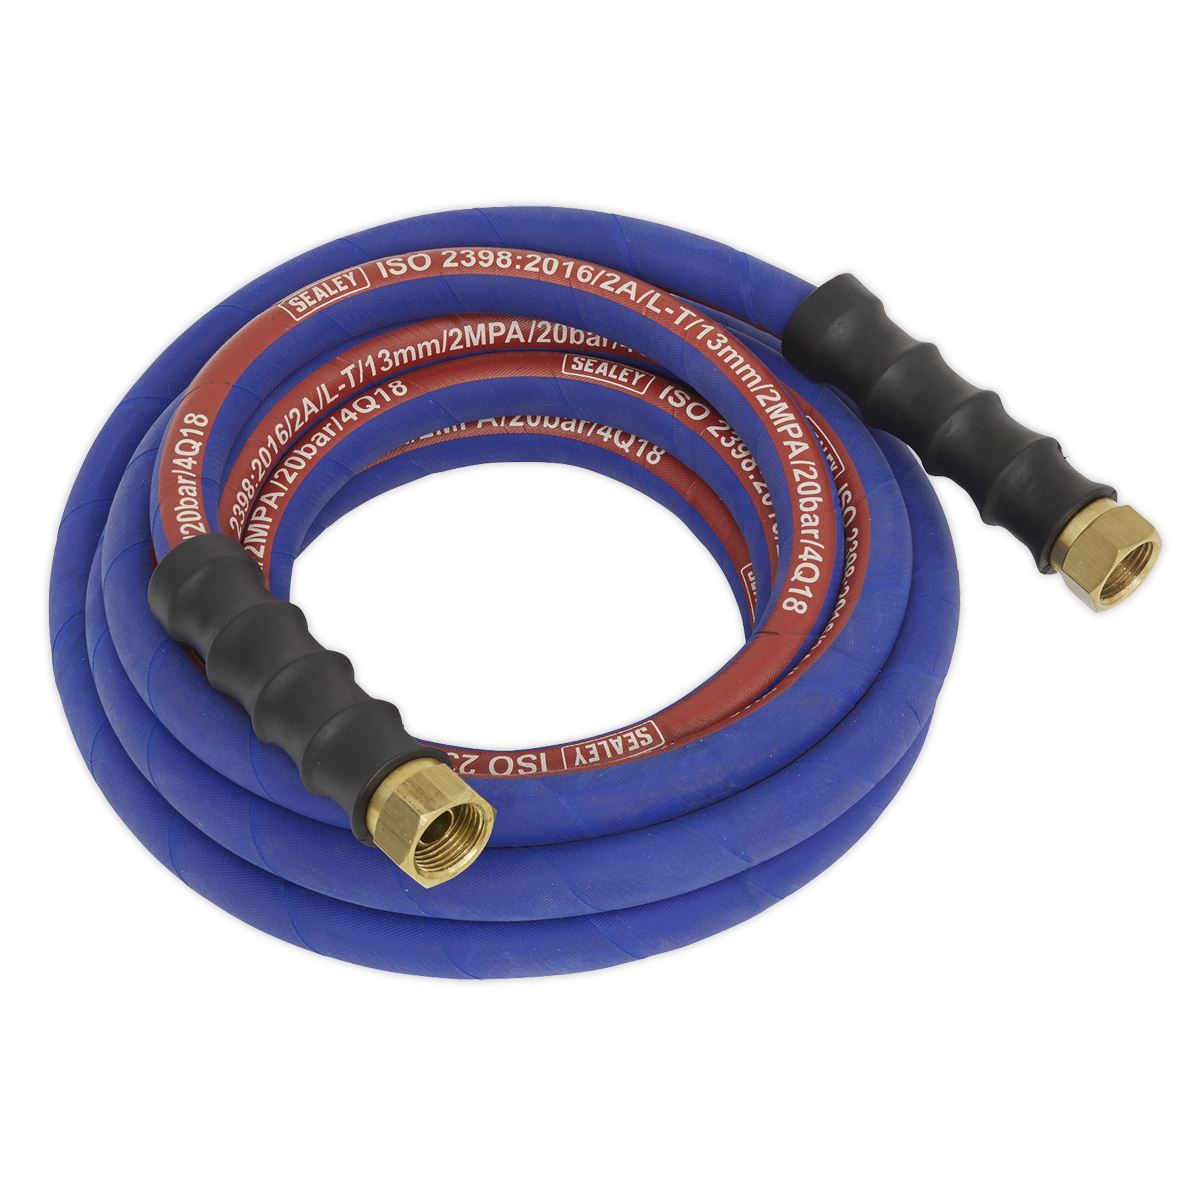 Sealey Air Hose 5m x Ø13mm with 1/2"BSP Unions Extra-Heavy-Duty